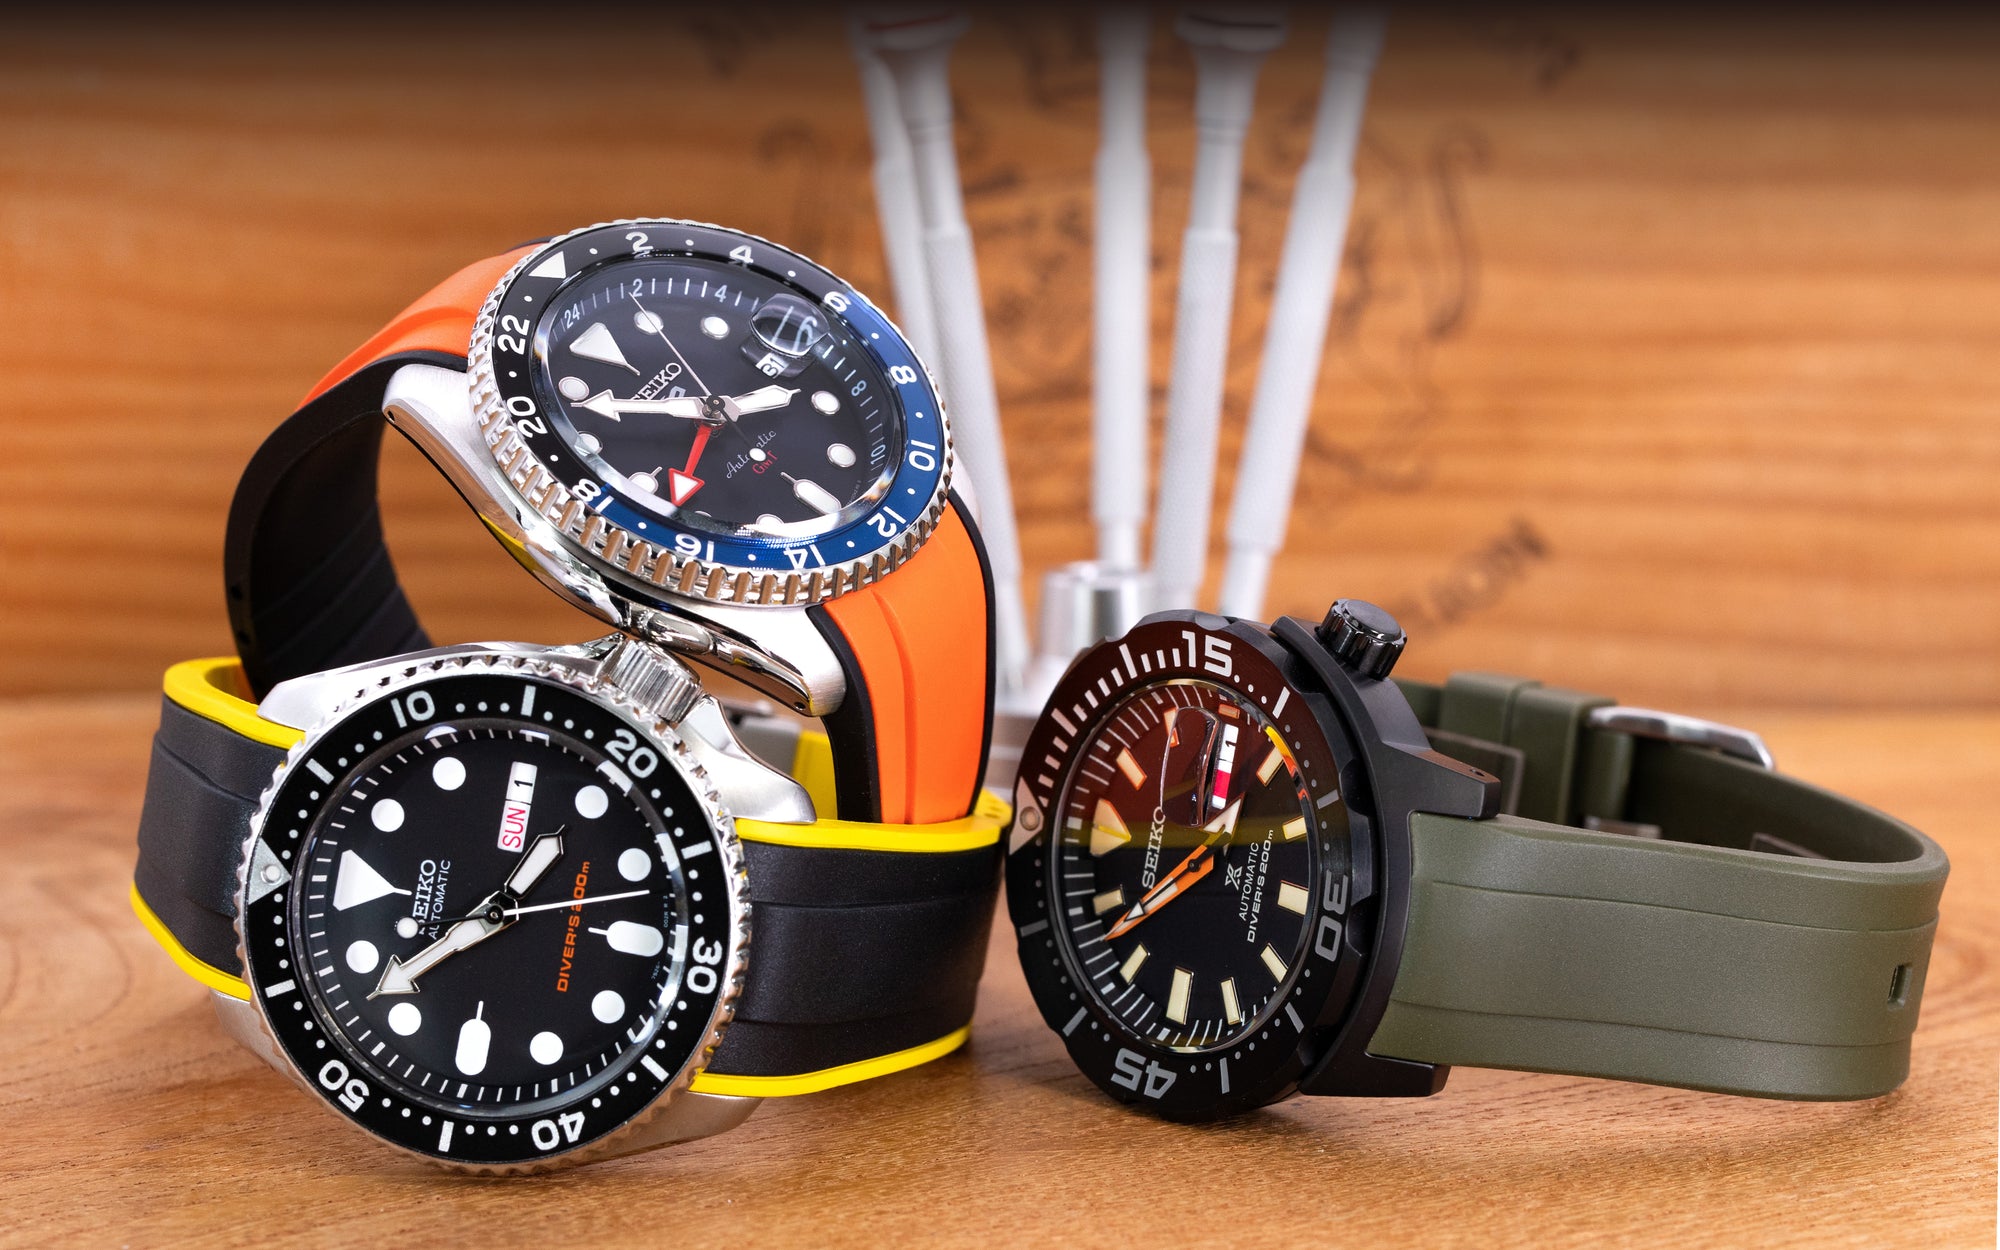 Strapcode: Watch Bands | Watch Straps | Upgrade your Seiko watch